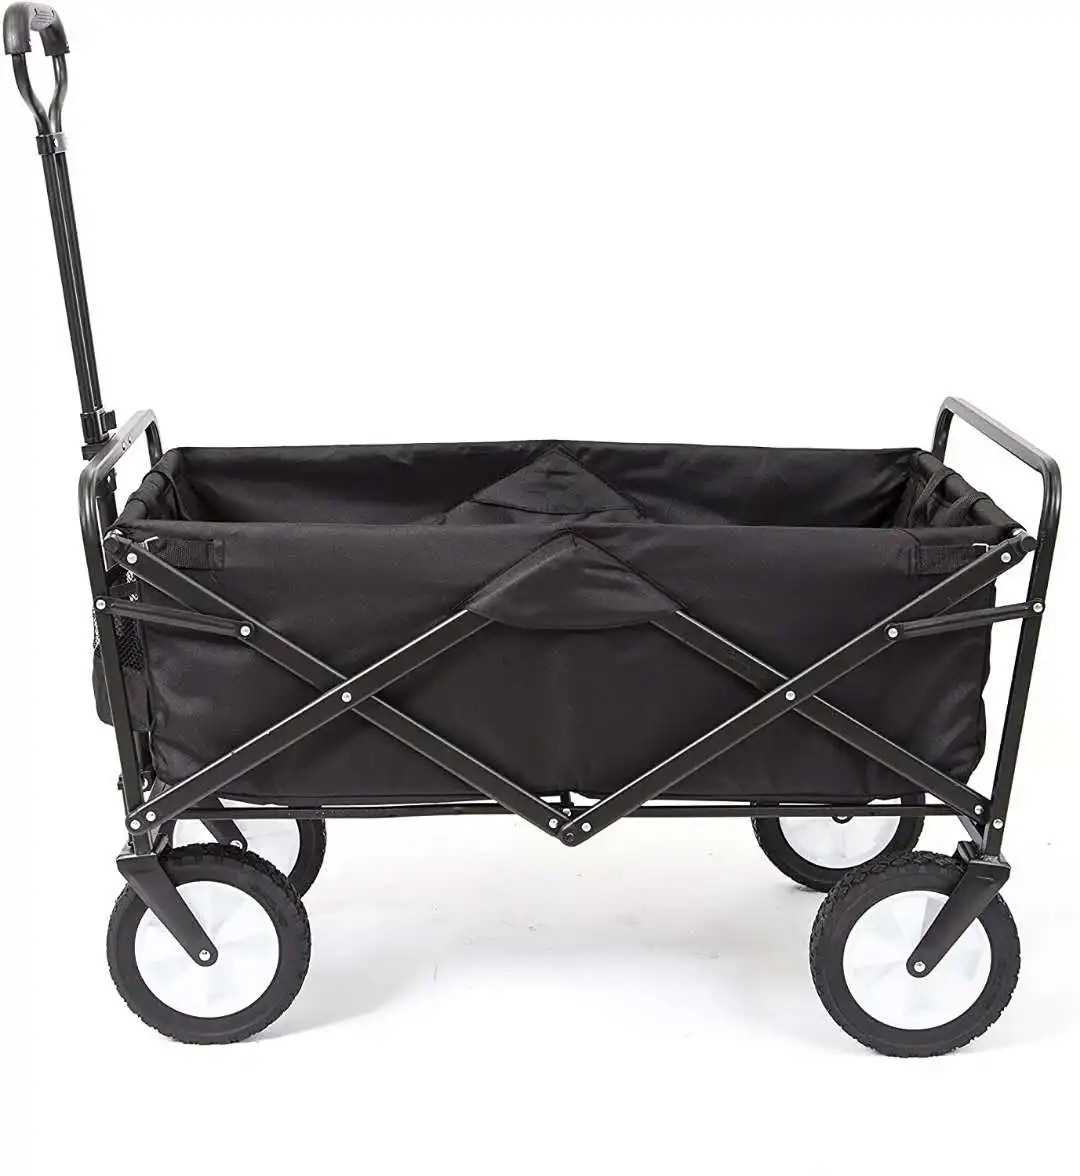 
In Stock.Outdoor foldable wagon 4 Wheels Collapsible Utility Cart Portable Storage Basket Garden Beach Trolley  (1600066949584)